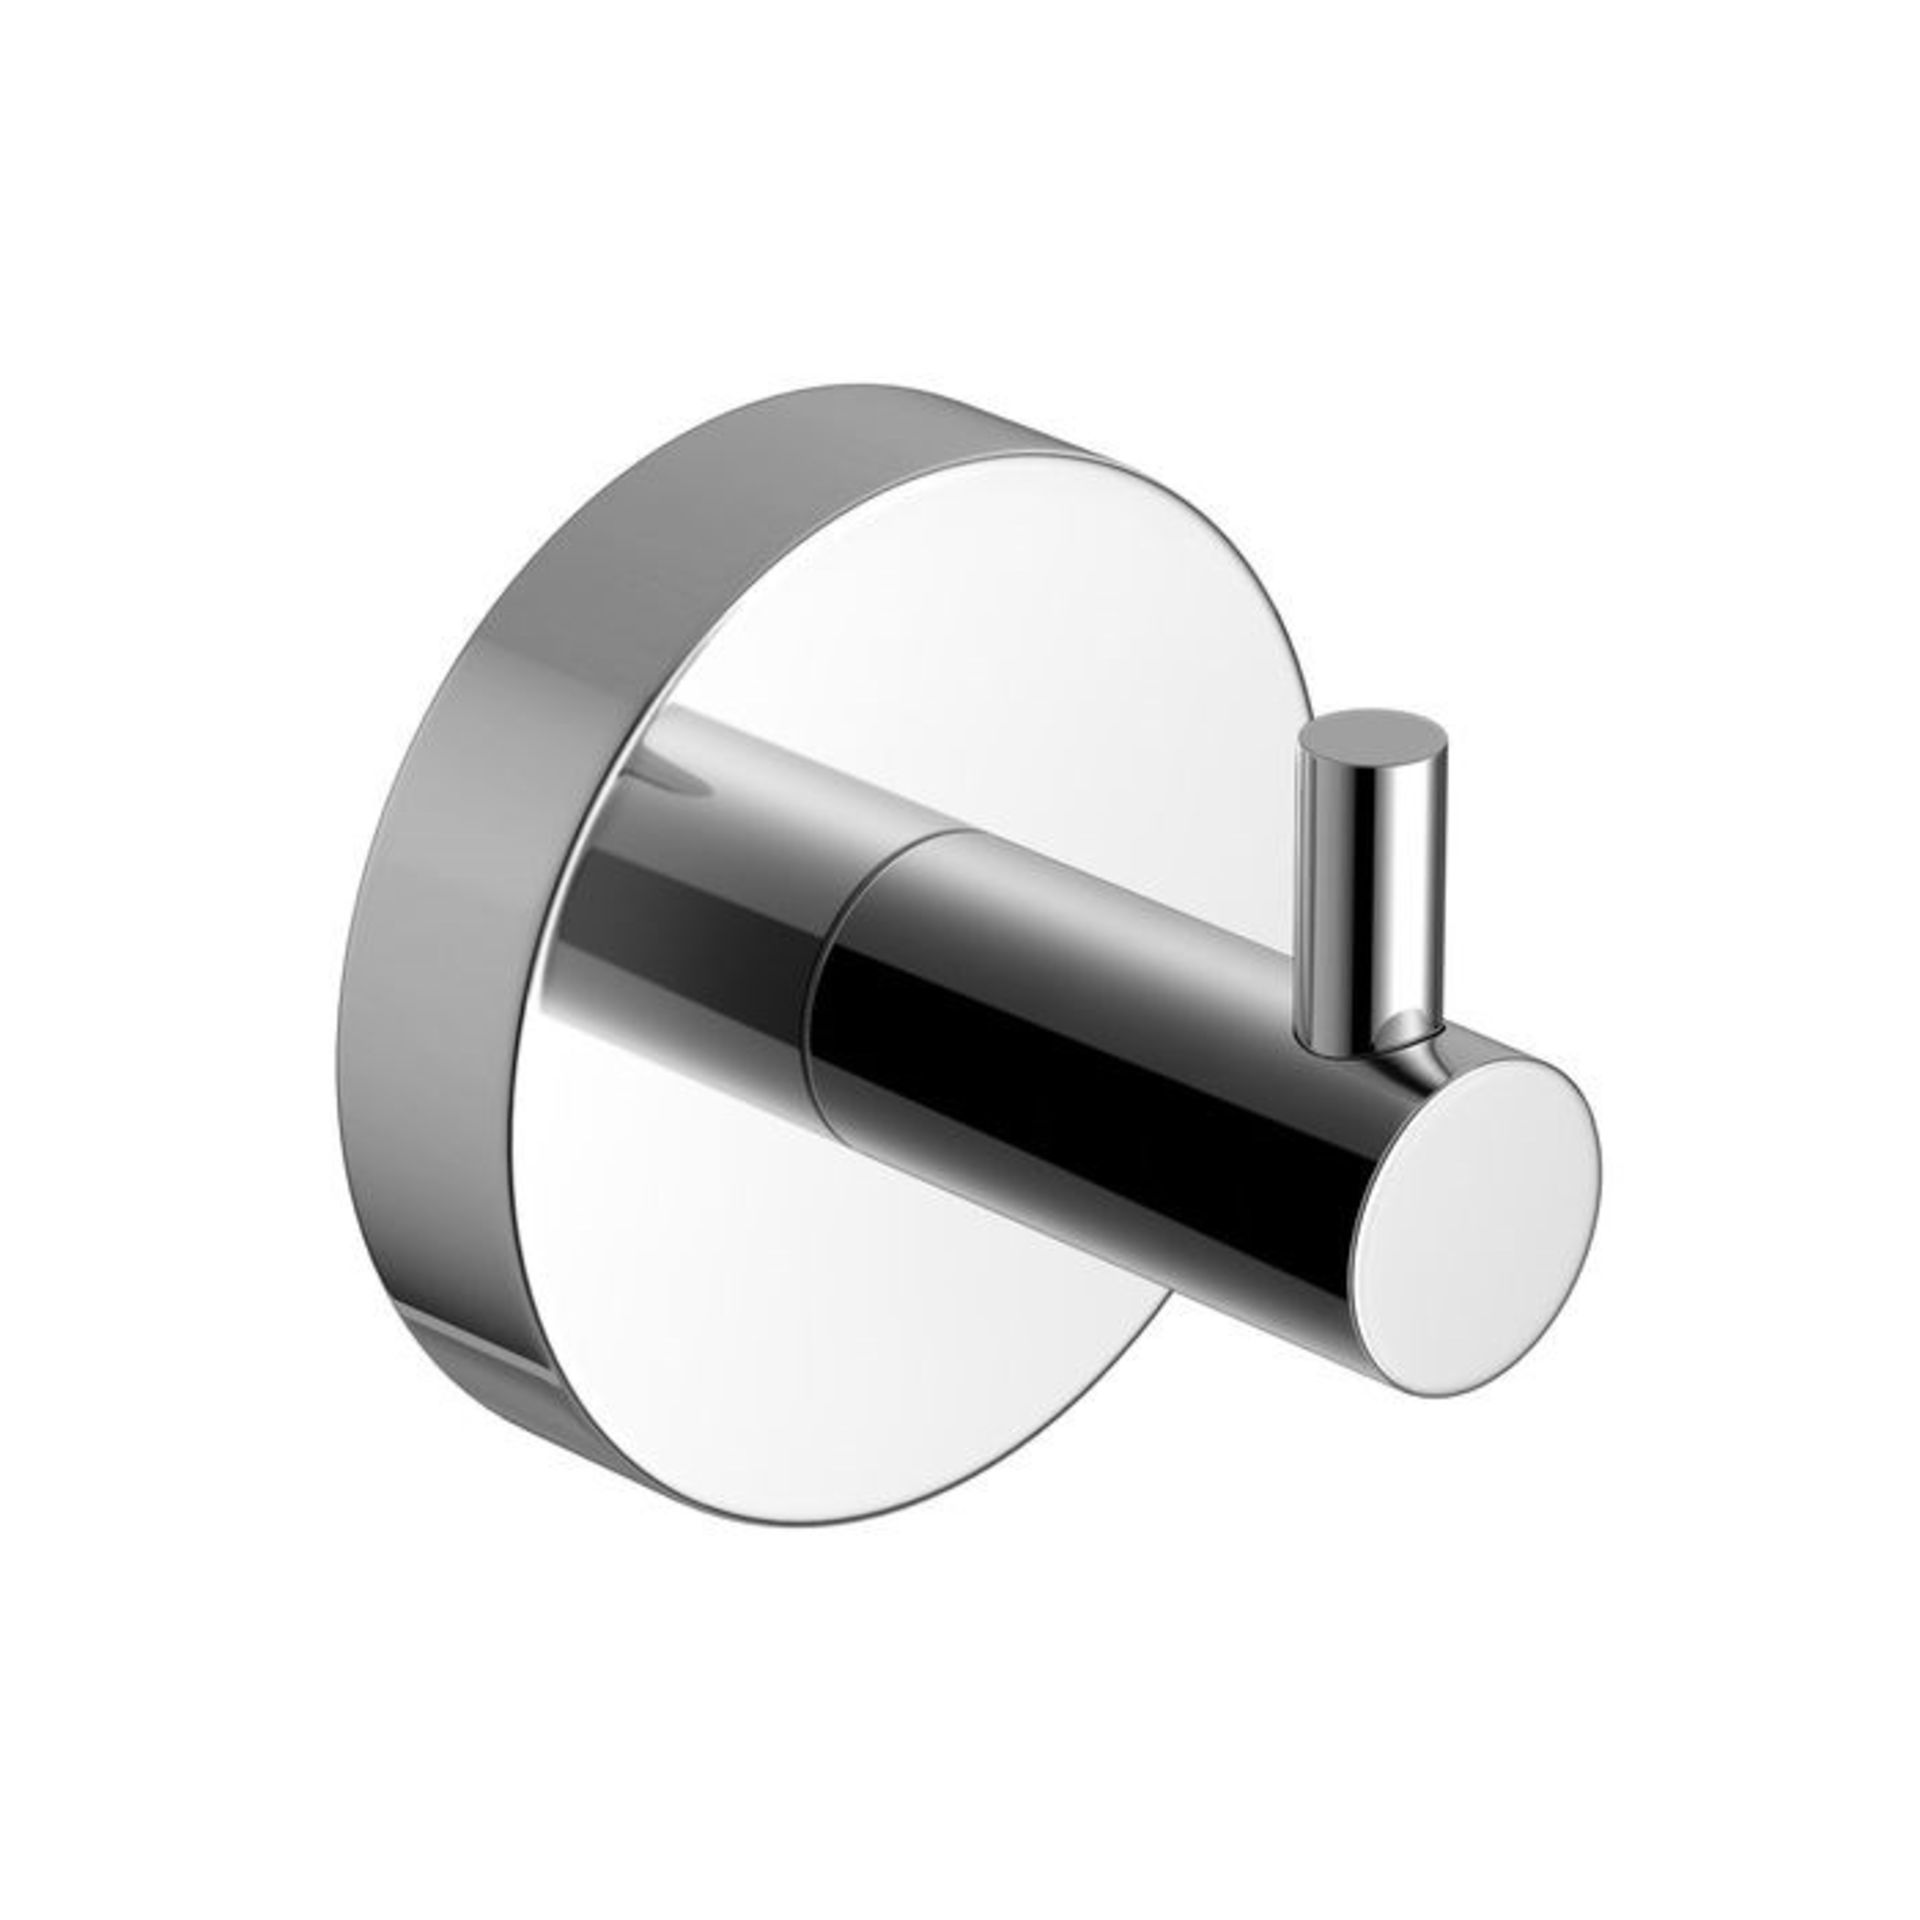 (QT1000) Finsbury Robe Hook. Finishes your bathroom with a little extra functionality and style... - Image 3 of 6